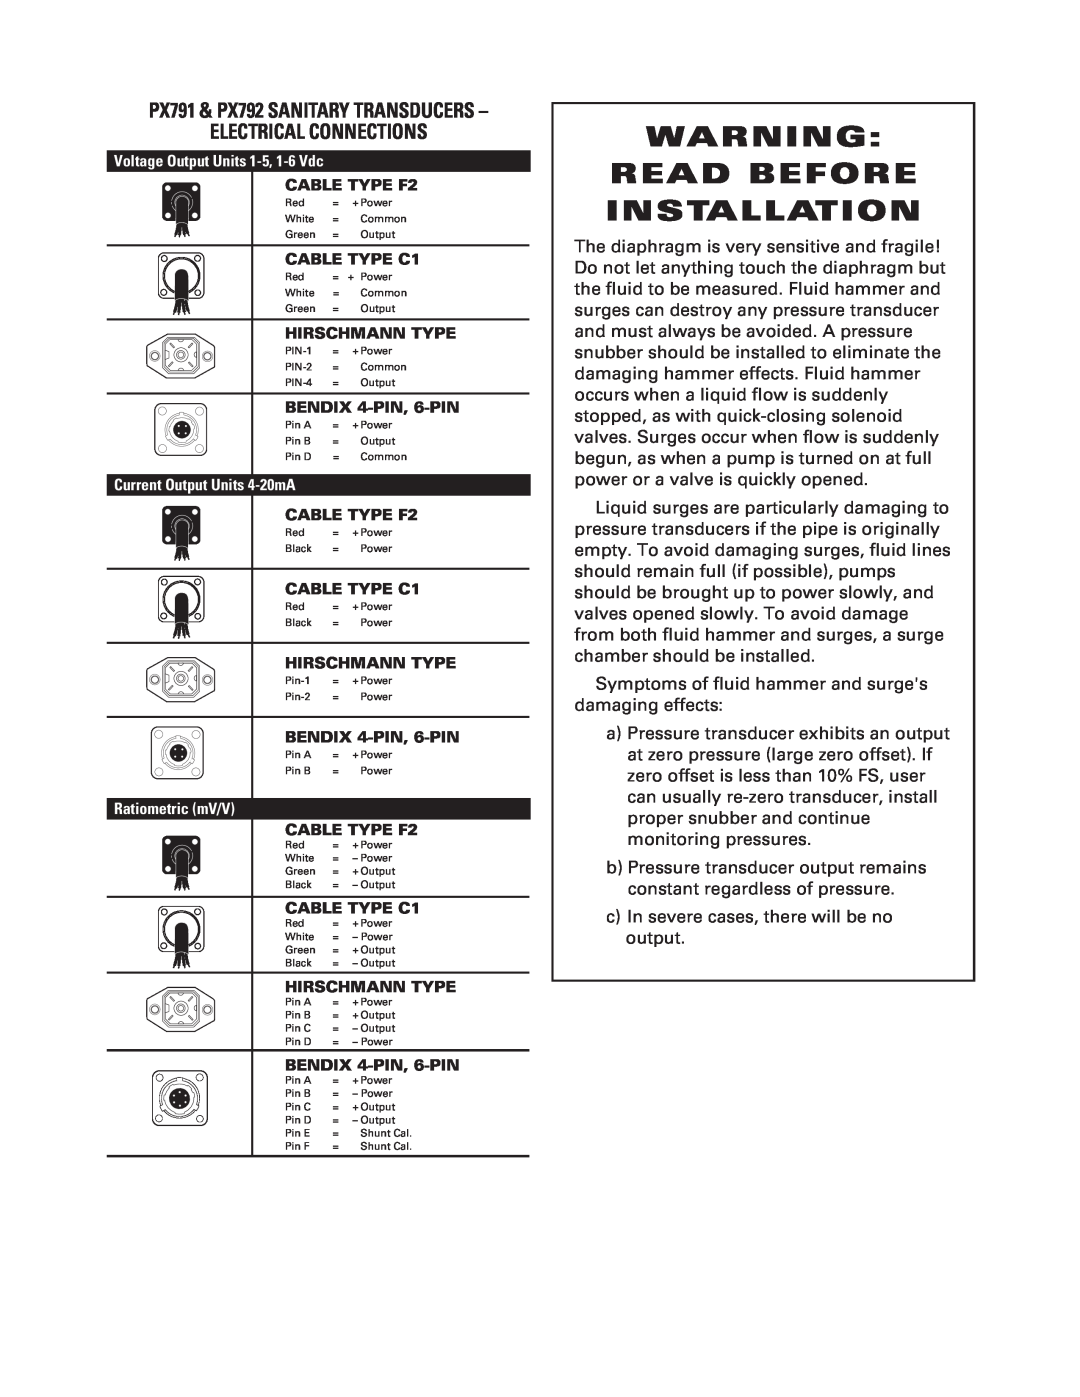 Omega Vehicle Security manual Read Before Installation, Electrical Connections, PX791 & PX792 SANITARY TRANSDUCERS 